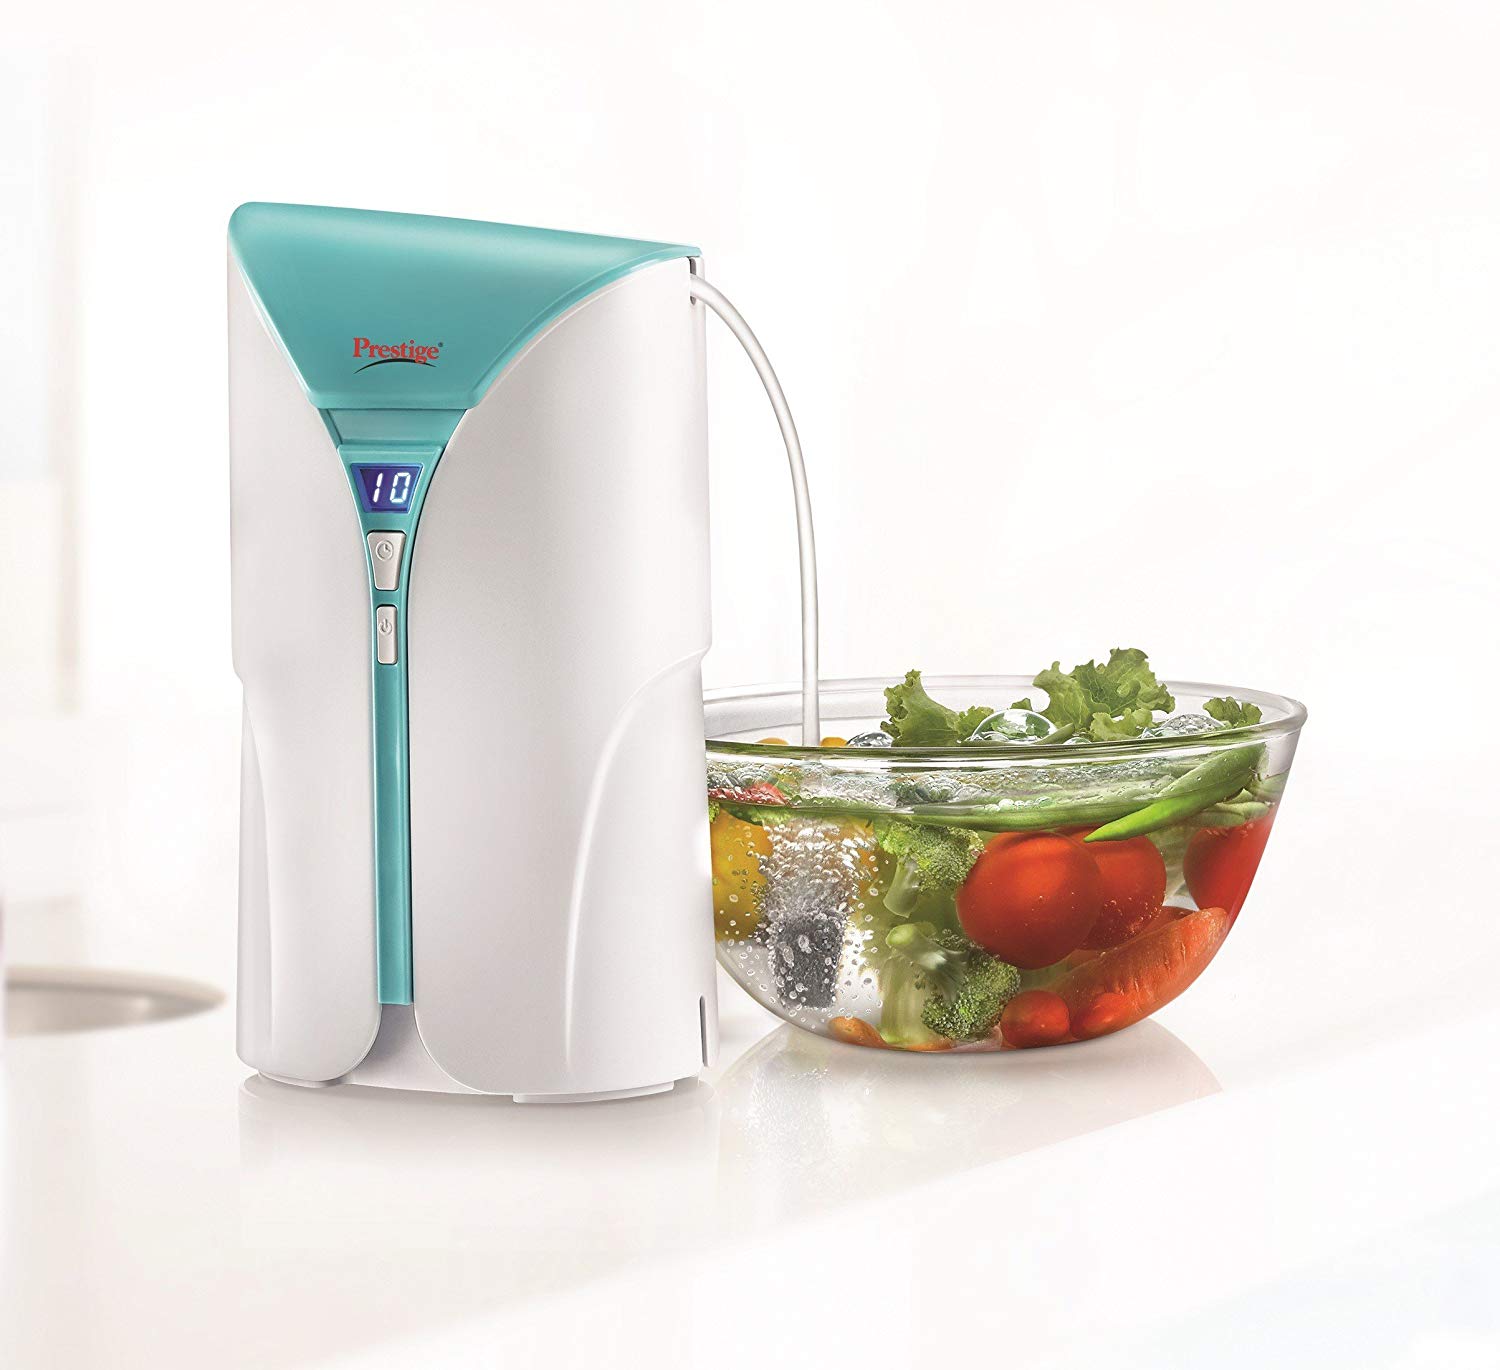 Prestige Clean Home Poz 1.0 Ozonizer Vegetables, Fruits, Lentils, Meat And Sea Food Purifier,White Price in India